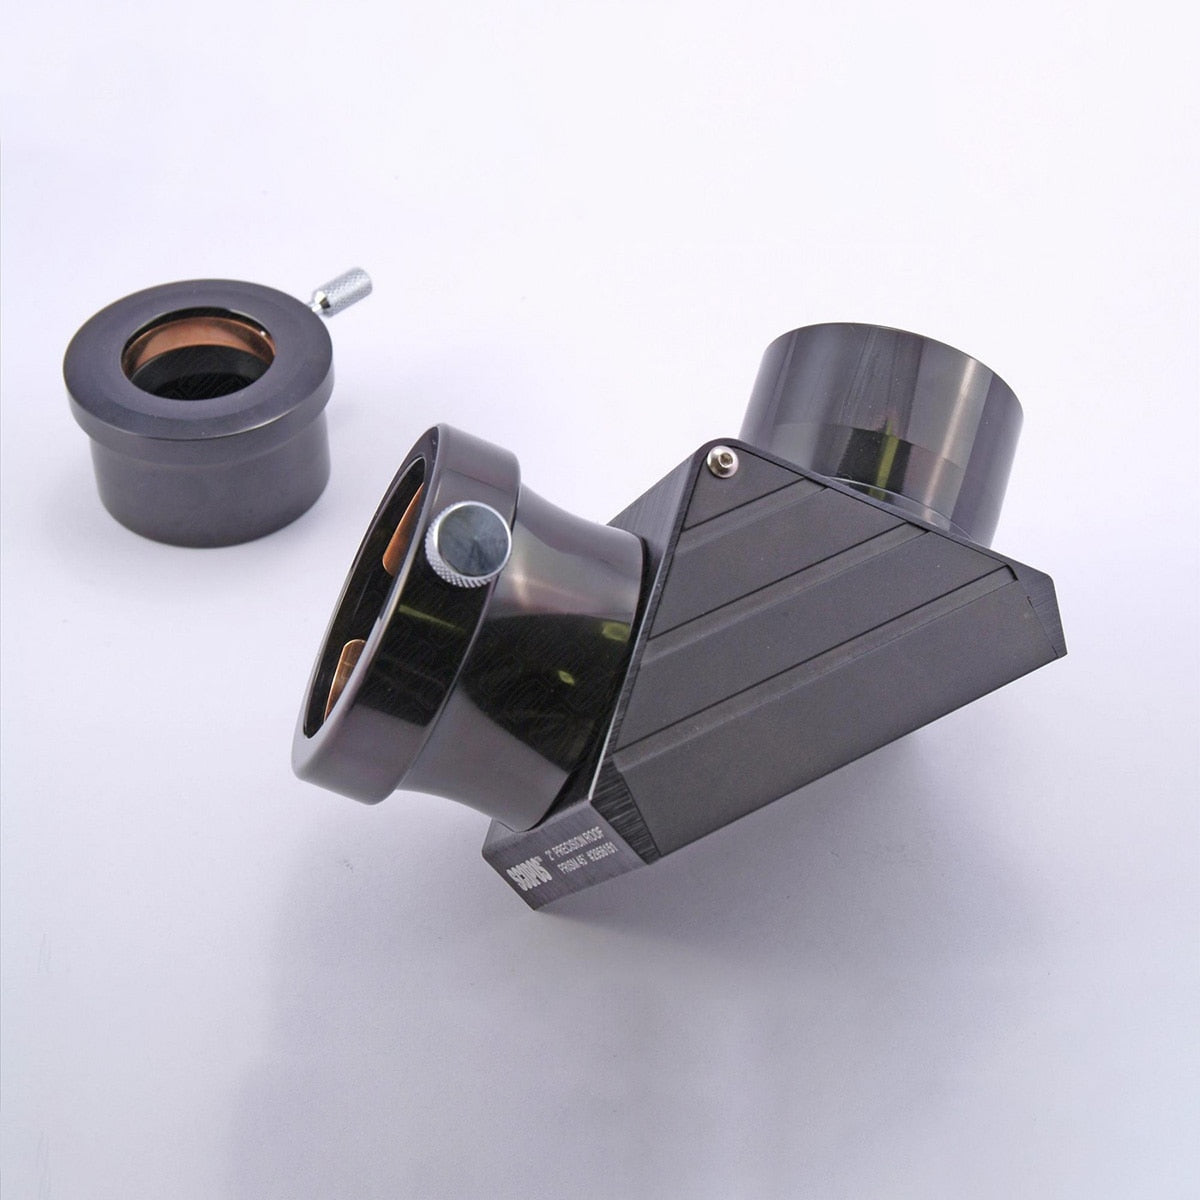 Baader 2" 90° Erecting Amici Prism Diagonal with 1.25" Eyepiece Adapter